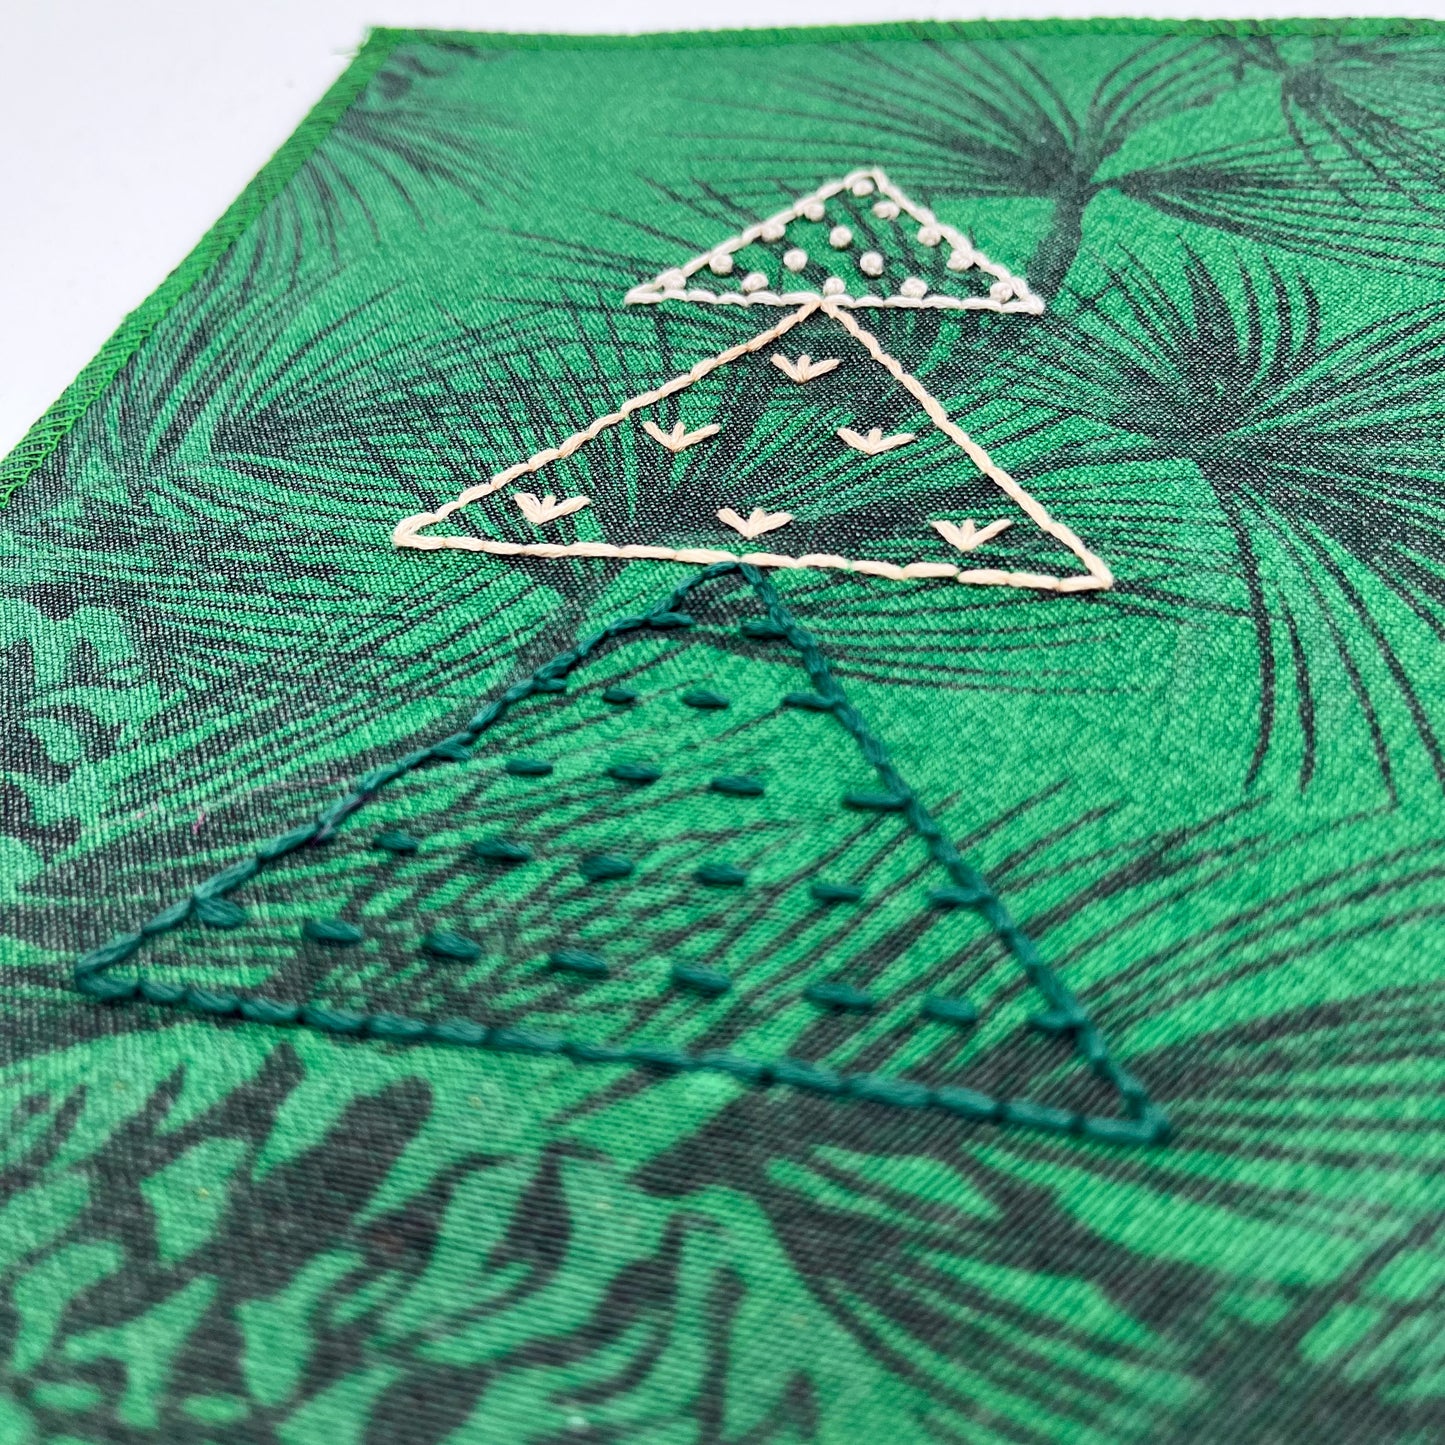 a close up view of a fabric wall hanging made from bright green fabric with pine branches printed on it, and stitched over with Christmas trees made from three triangles, each triangle filled with different types of stitches in green peach and ivory